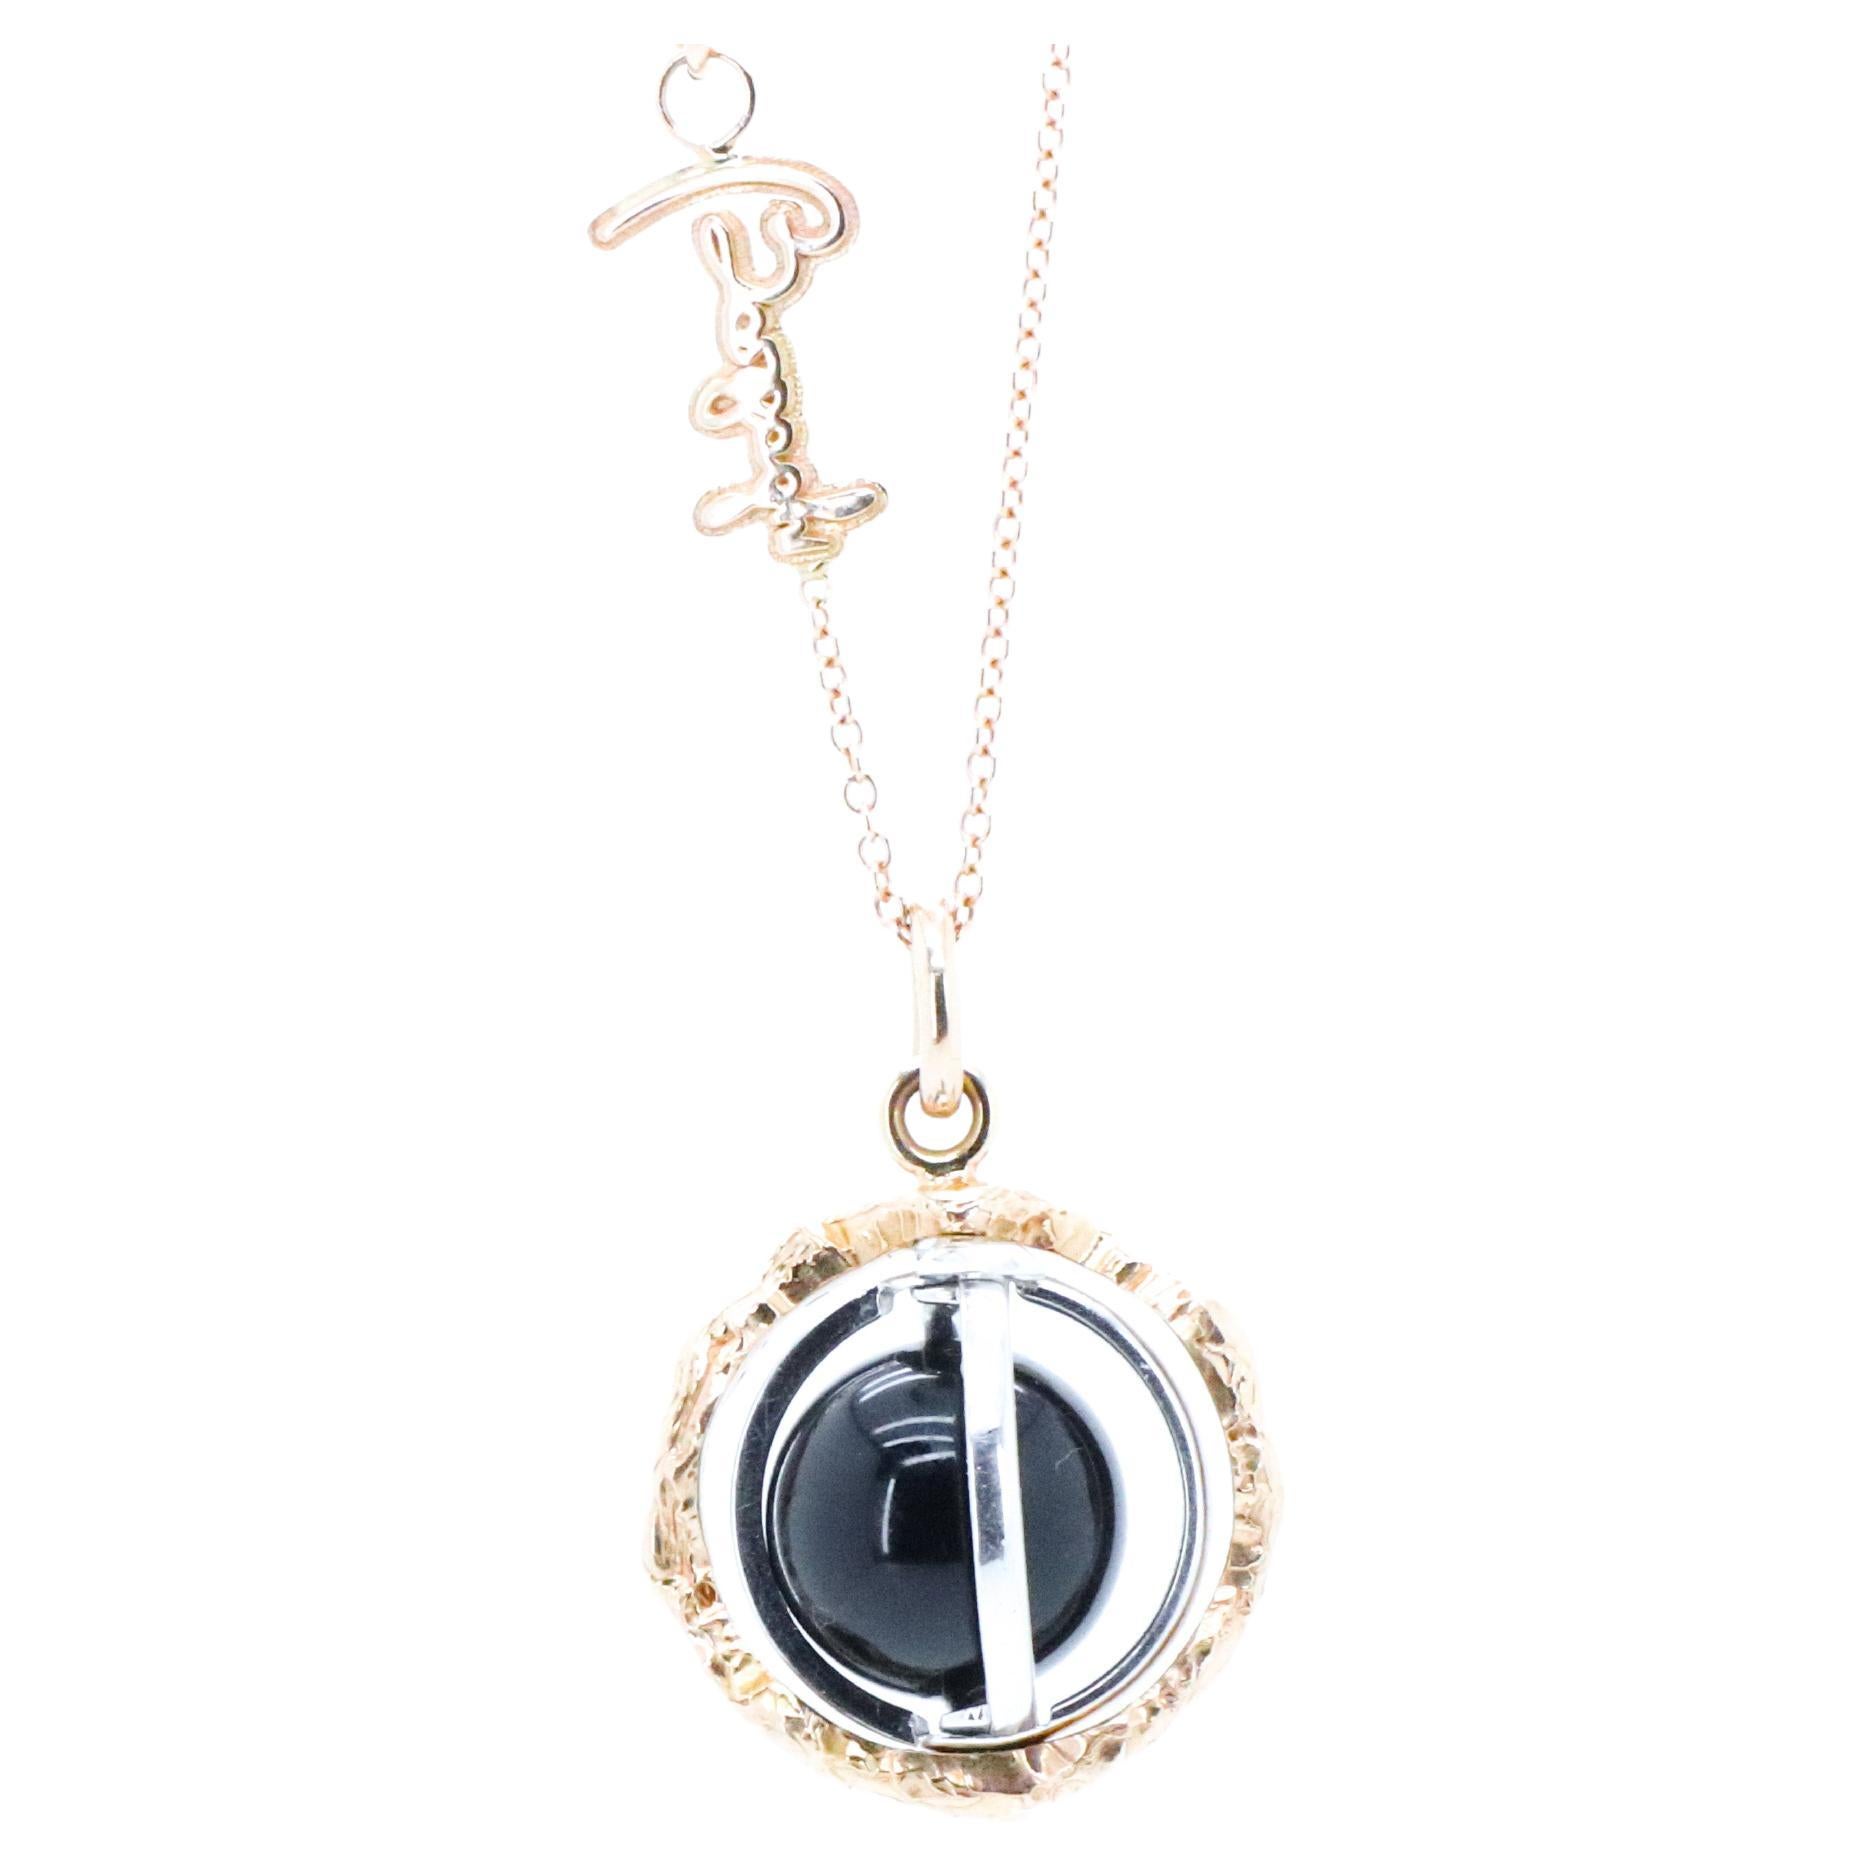 18k Gold Made in Italy Onyx Changeable Gem Revolving Loops Essence Necklace.
Experience the Wellbeing of Sound and Gemstones with the Sonoro Pendant Necklace.
Unlock Your Divine Potential with the Sonoro pendant. 
Gems and metal are energetically